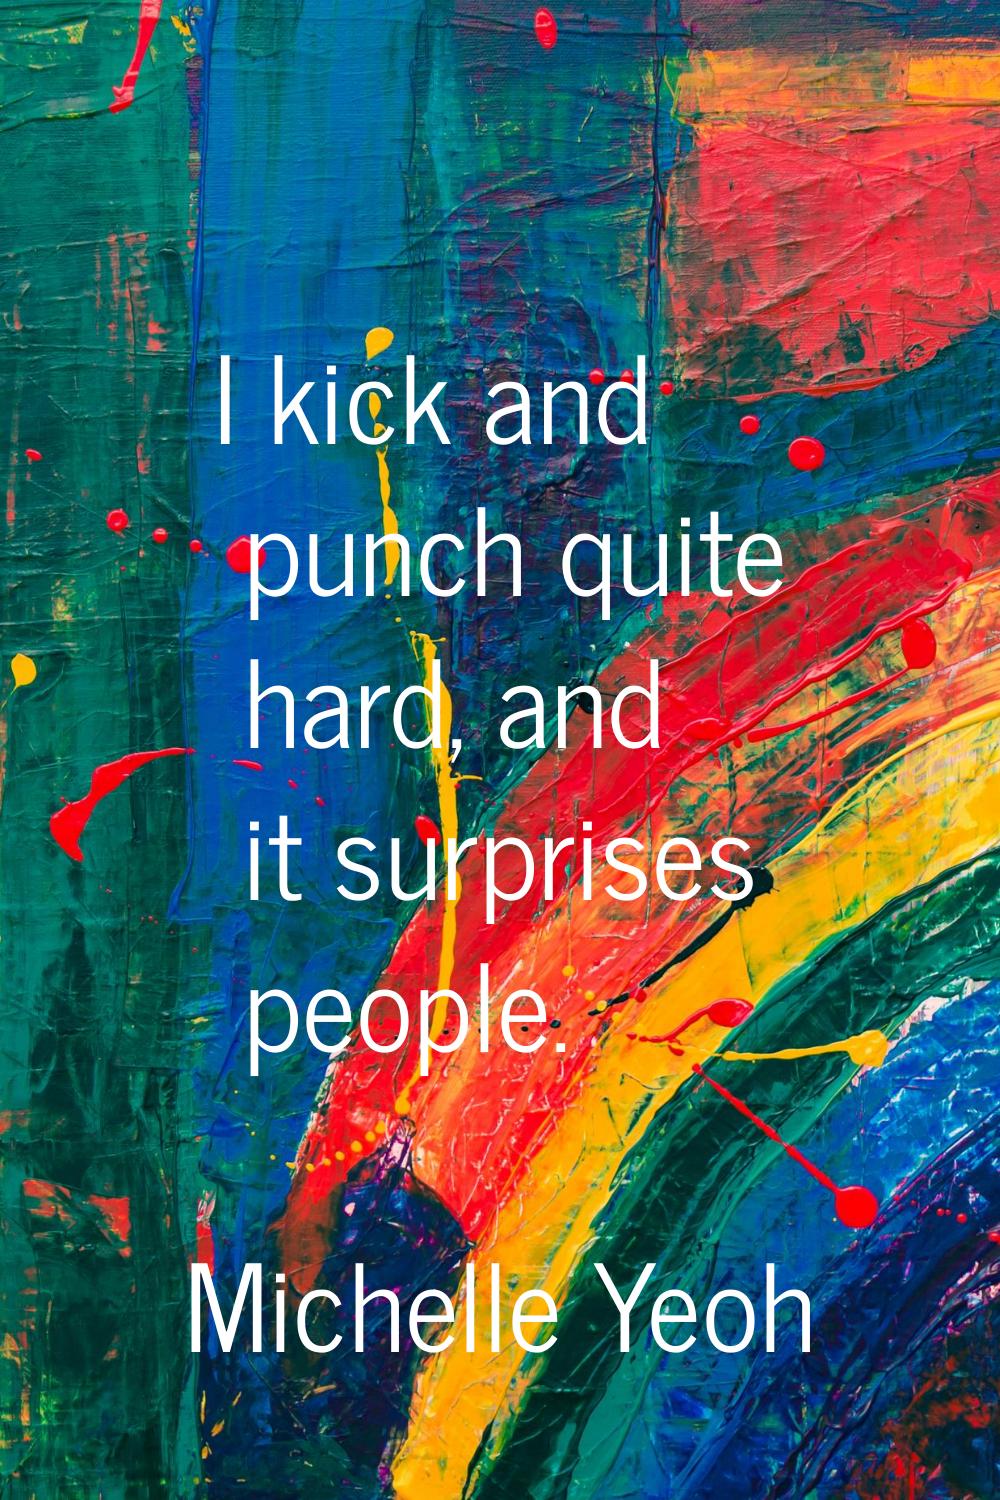 I kick and punch quite hard, and it surprises people.